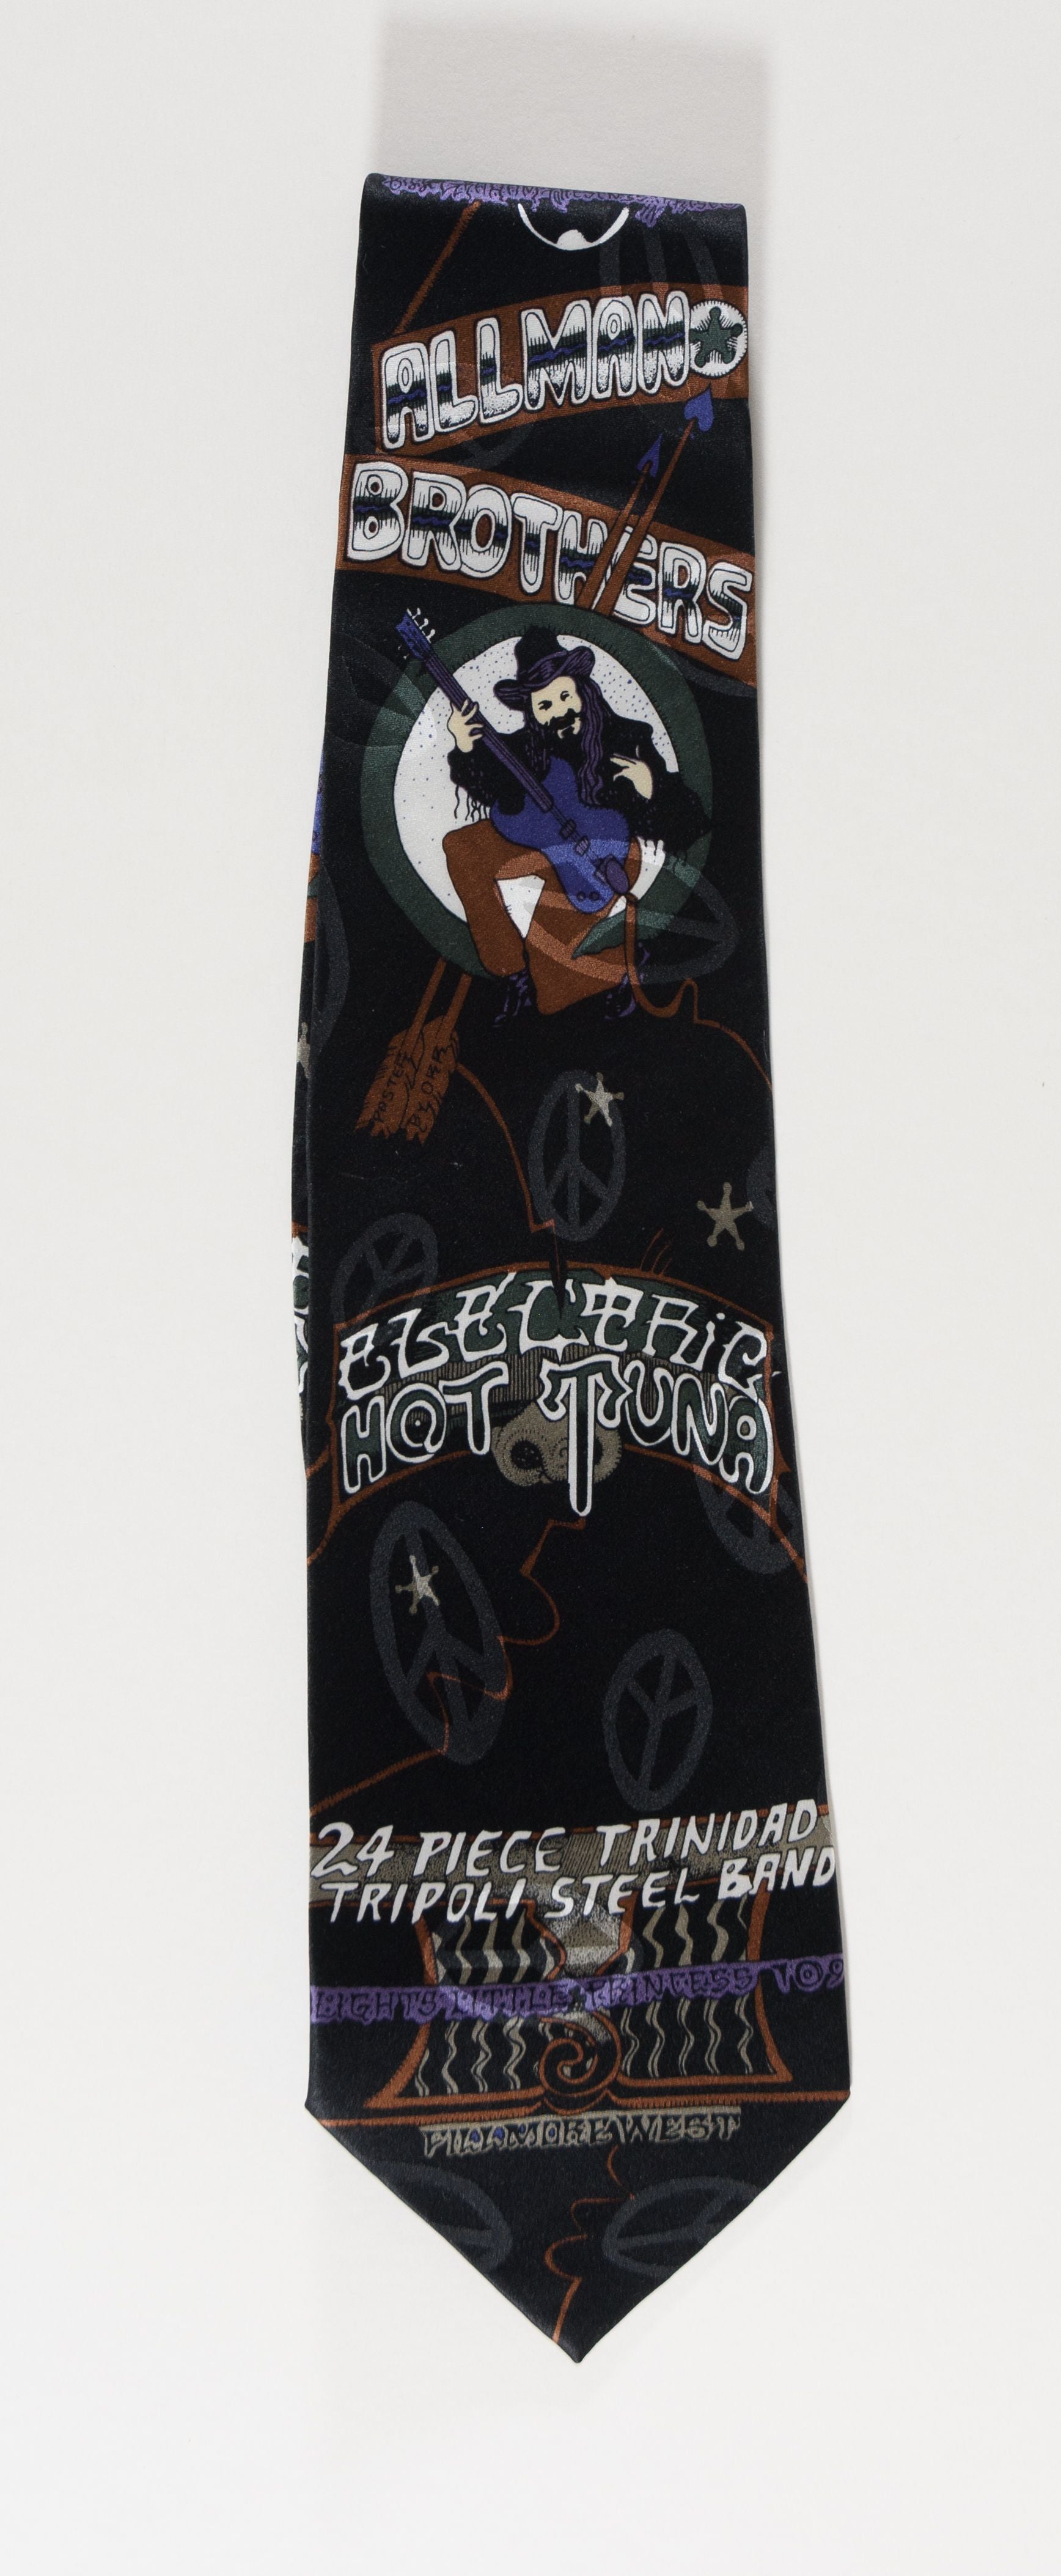 BG-268 Neck Tie Guitar Man Blue from the Filmore Poster Collection of Ties